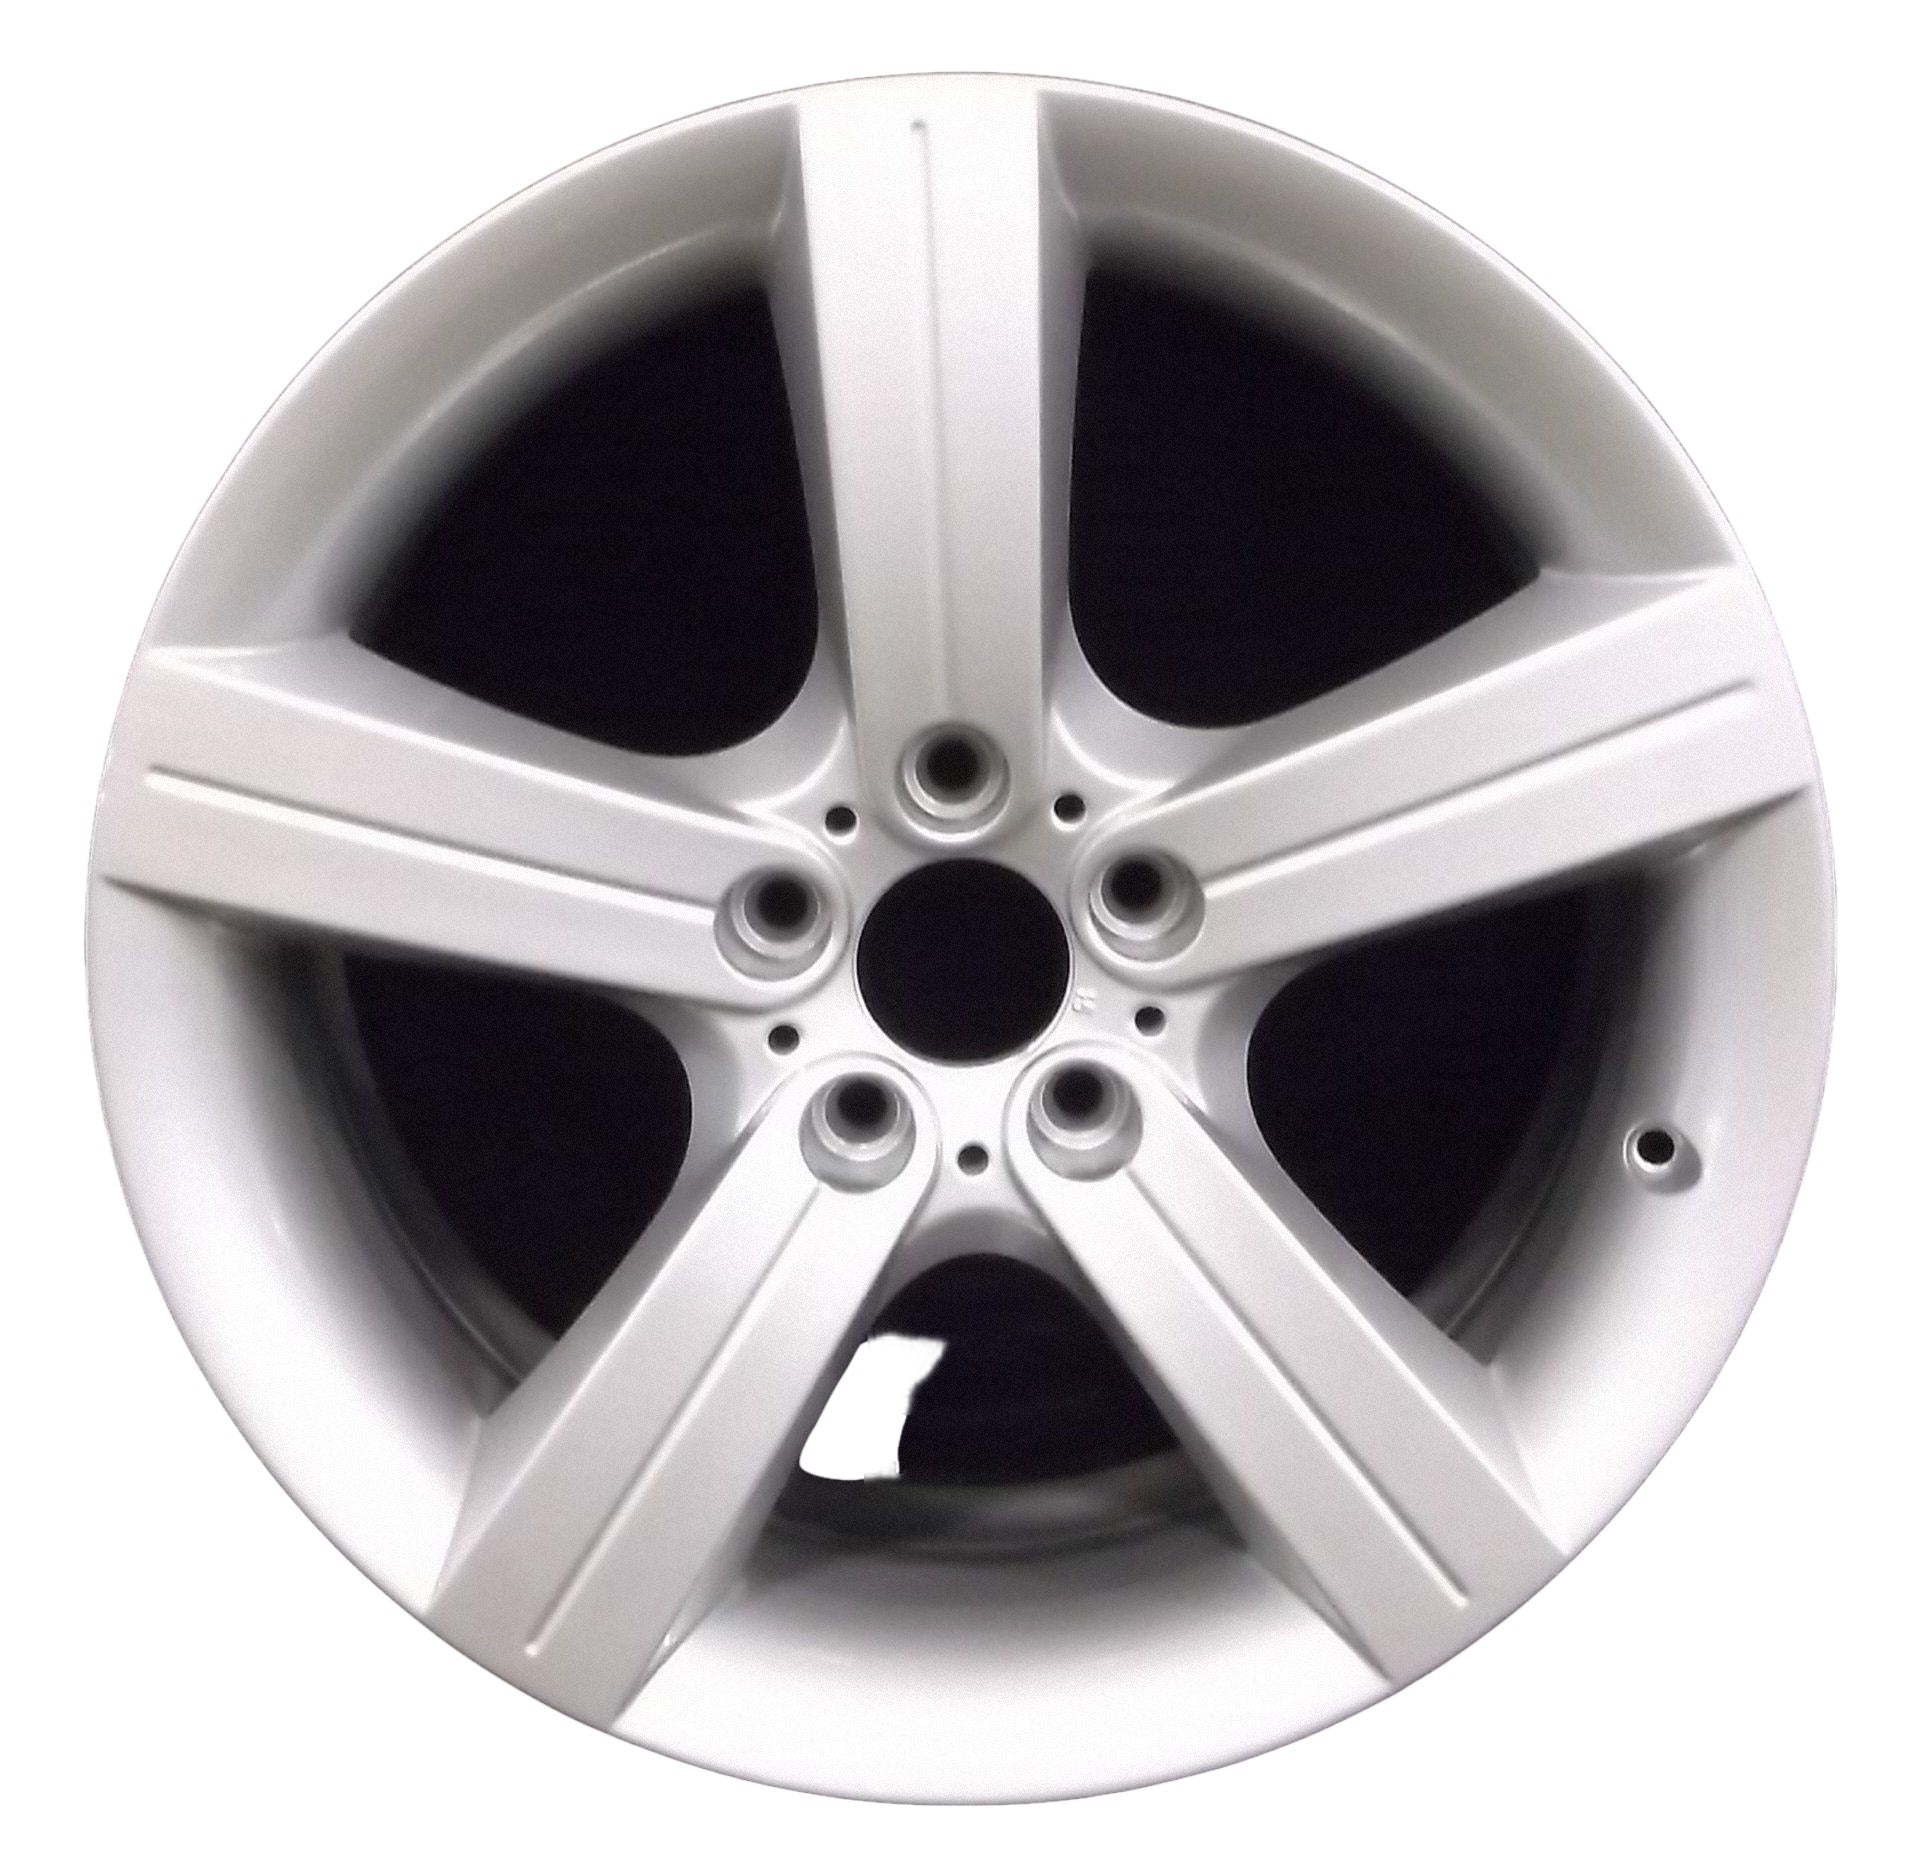 BMW 328i  2007, 2008, 2009, 2010, 2011, 2012, 2013 Factory OEM Car Wheel Size 19x9 Alloy WAO.59599RE.PS15.FF